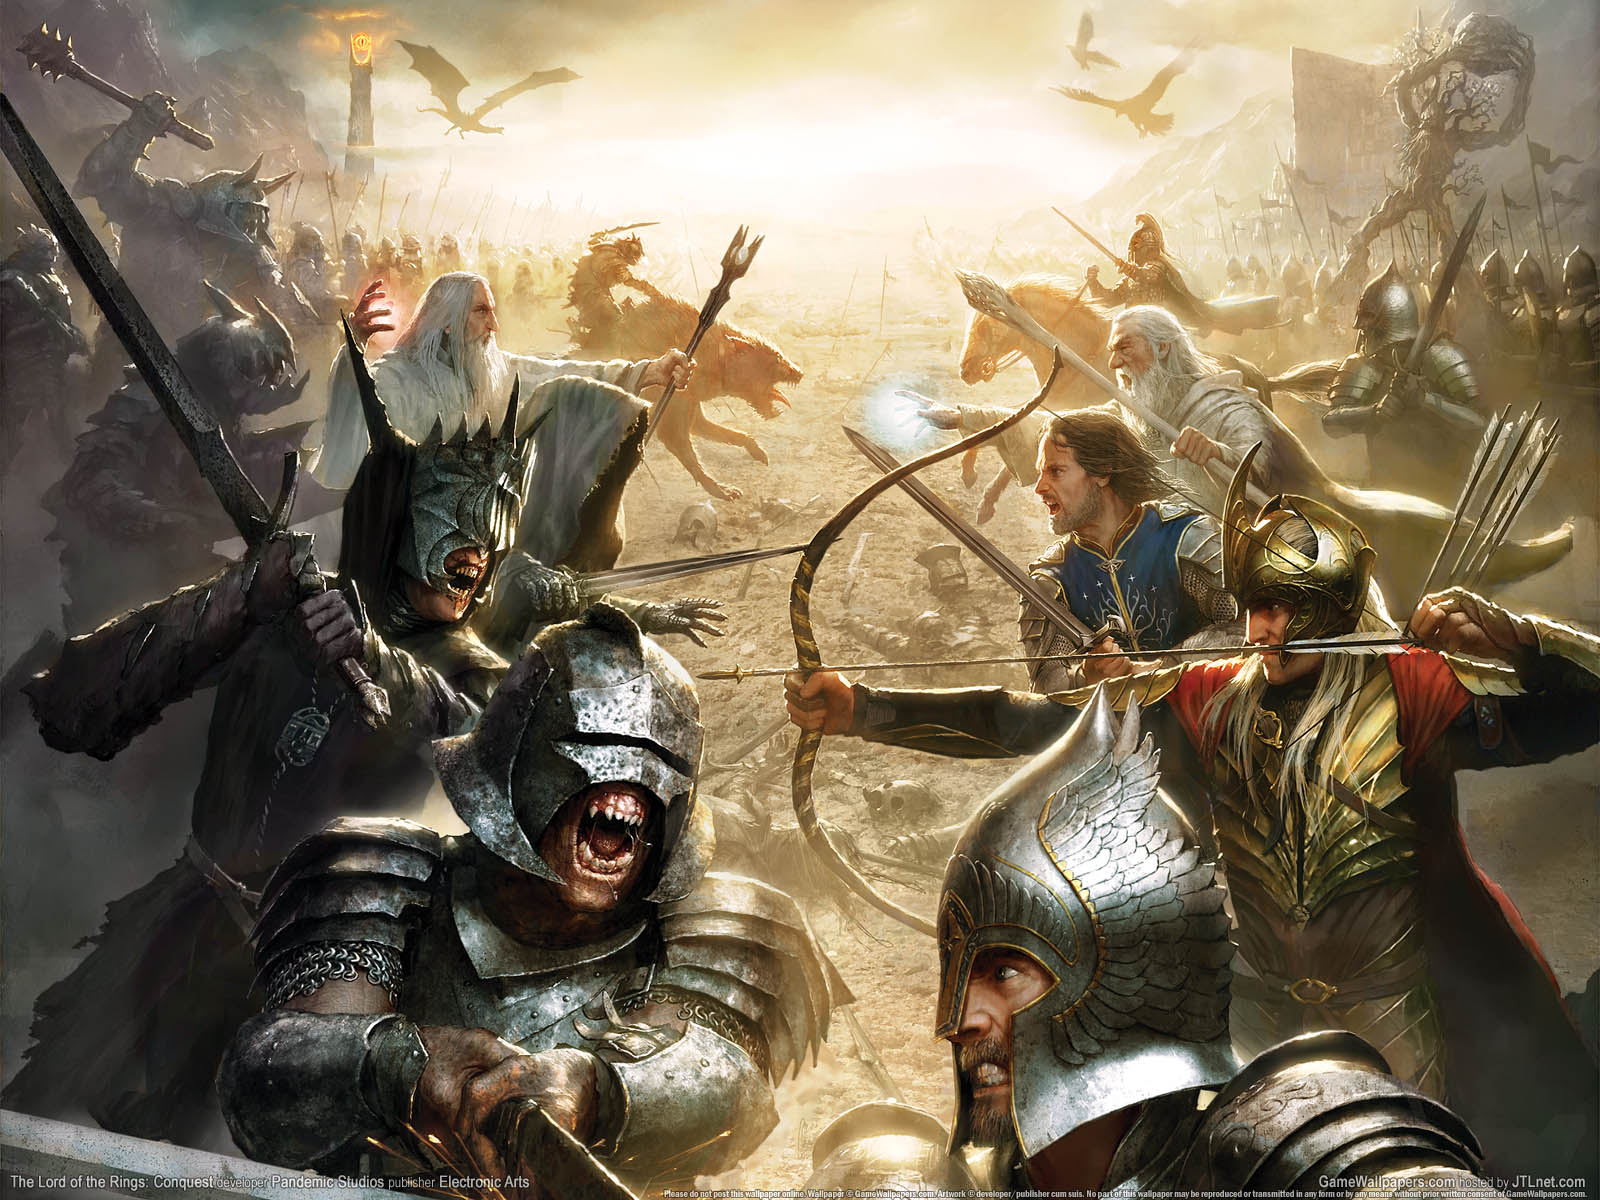 The Lord of the Rings%3A Conquest achtergrond 01 1600x1200